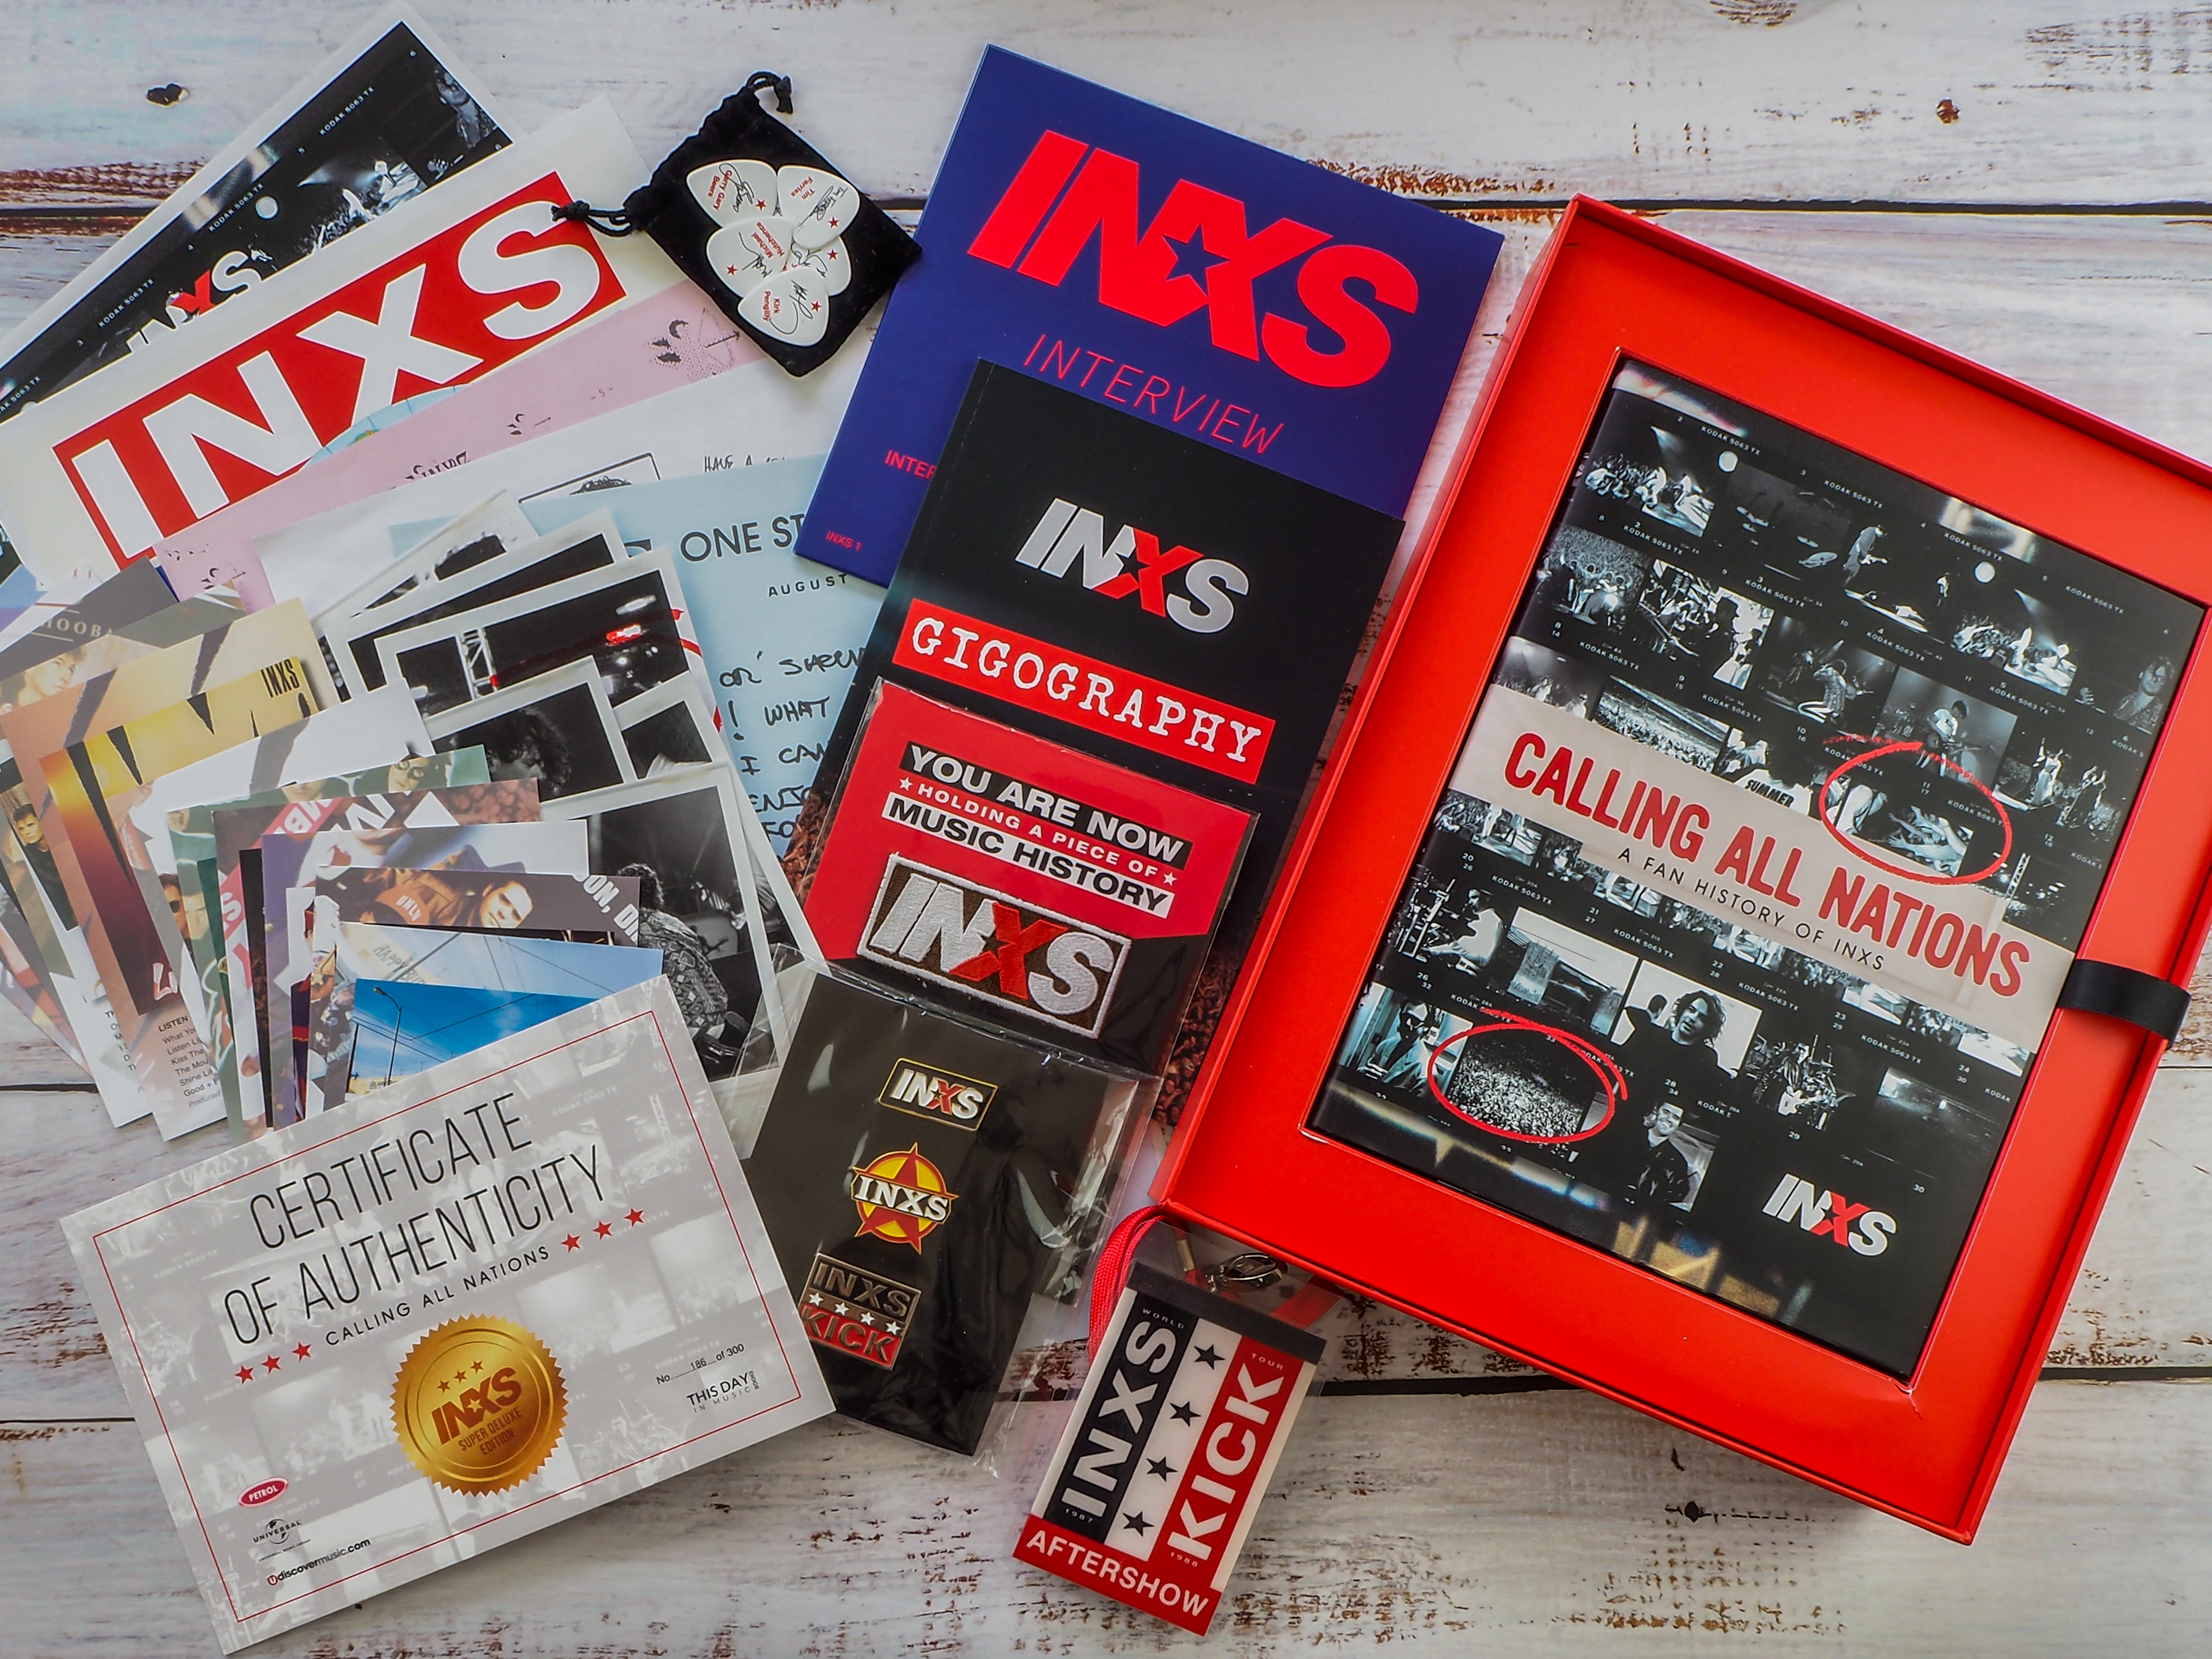 INXS - Calling All Nations: A Fan History of INXS (Deluxe Edition Book)